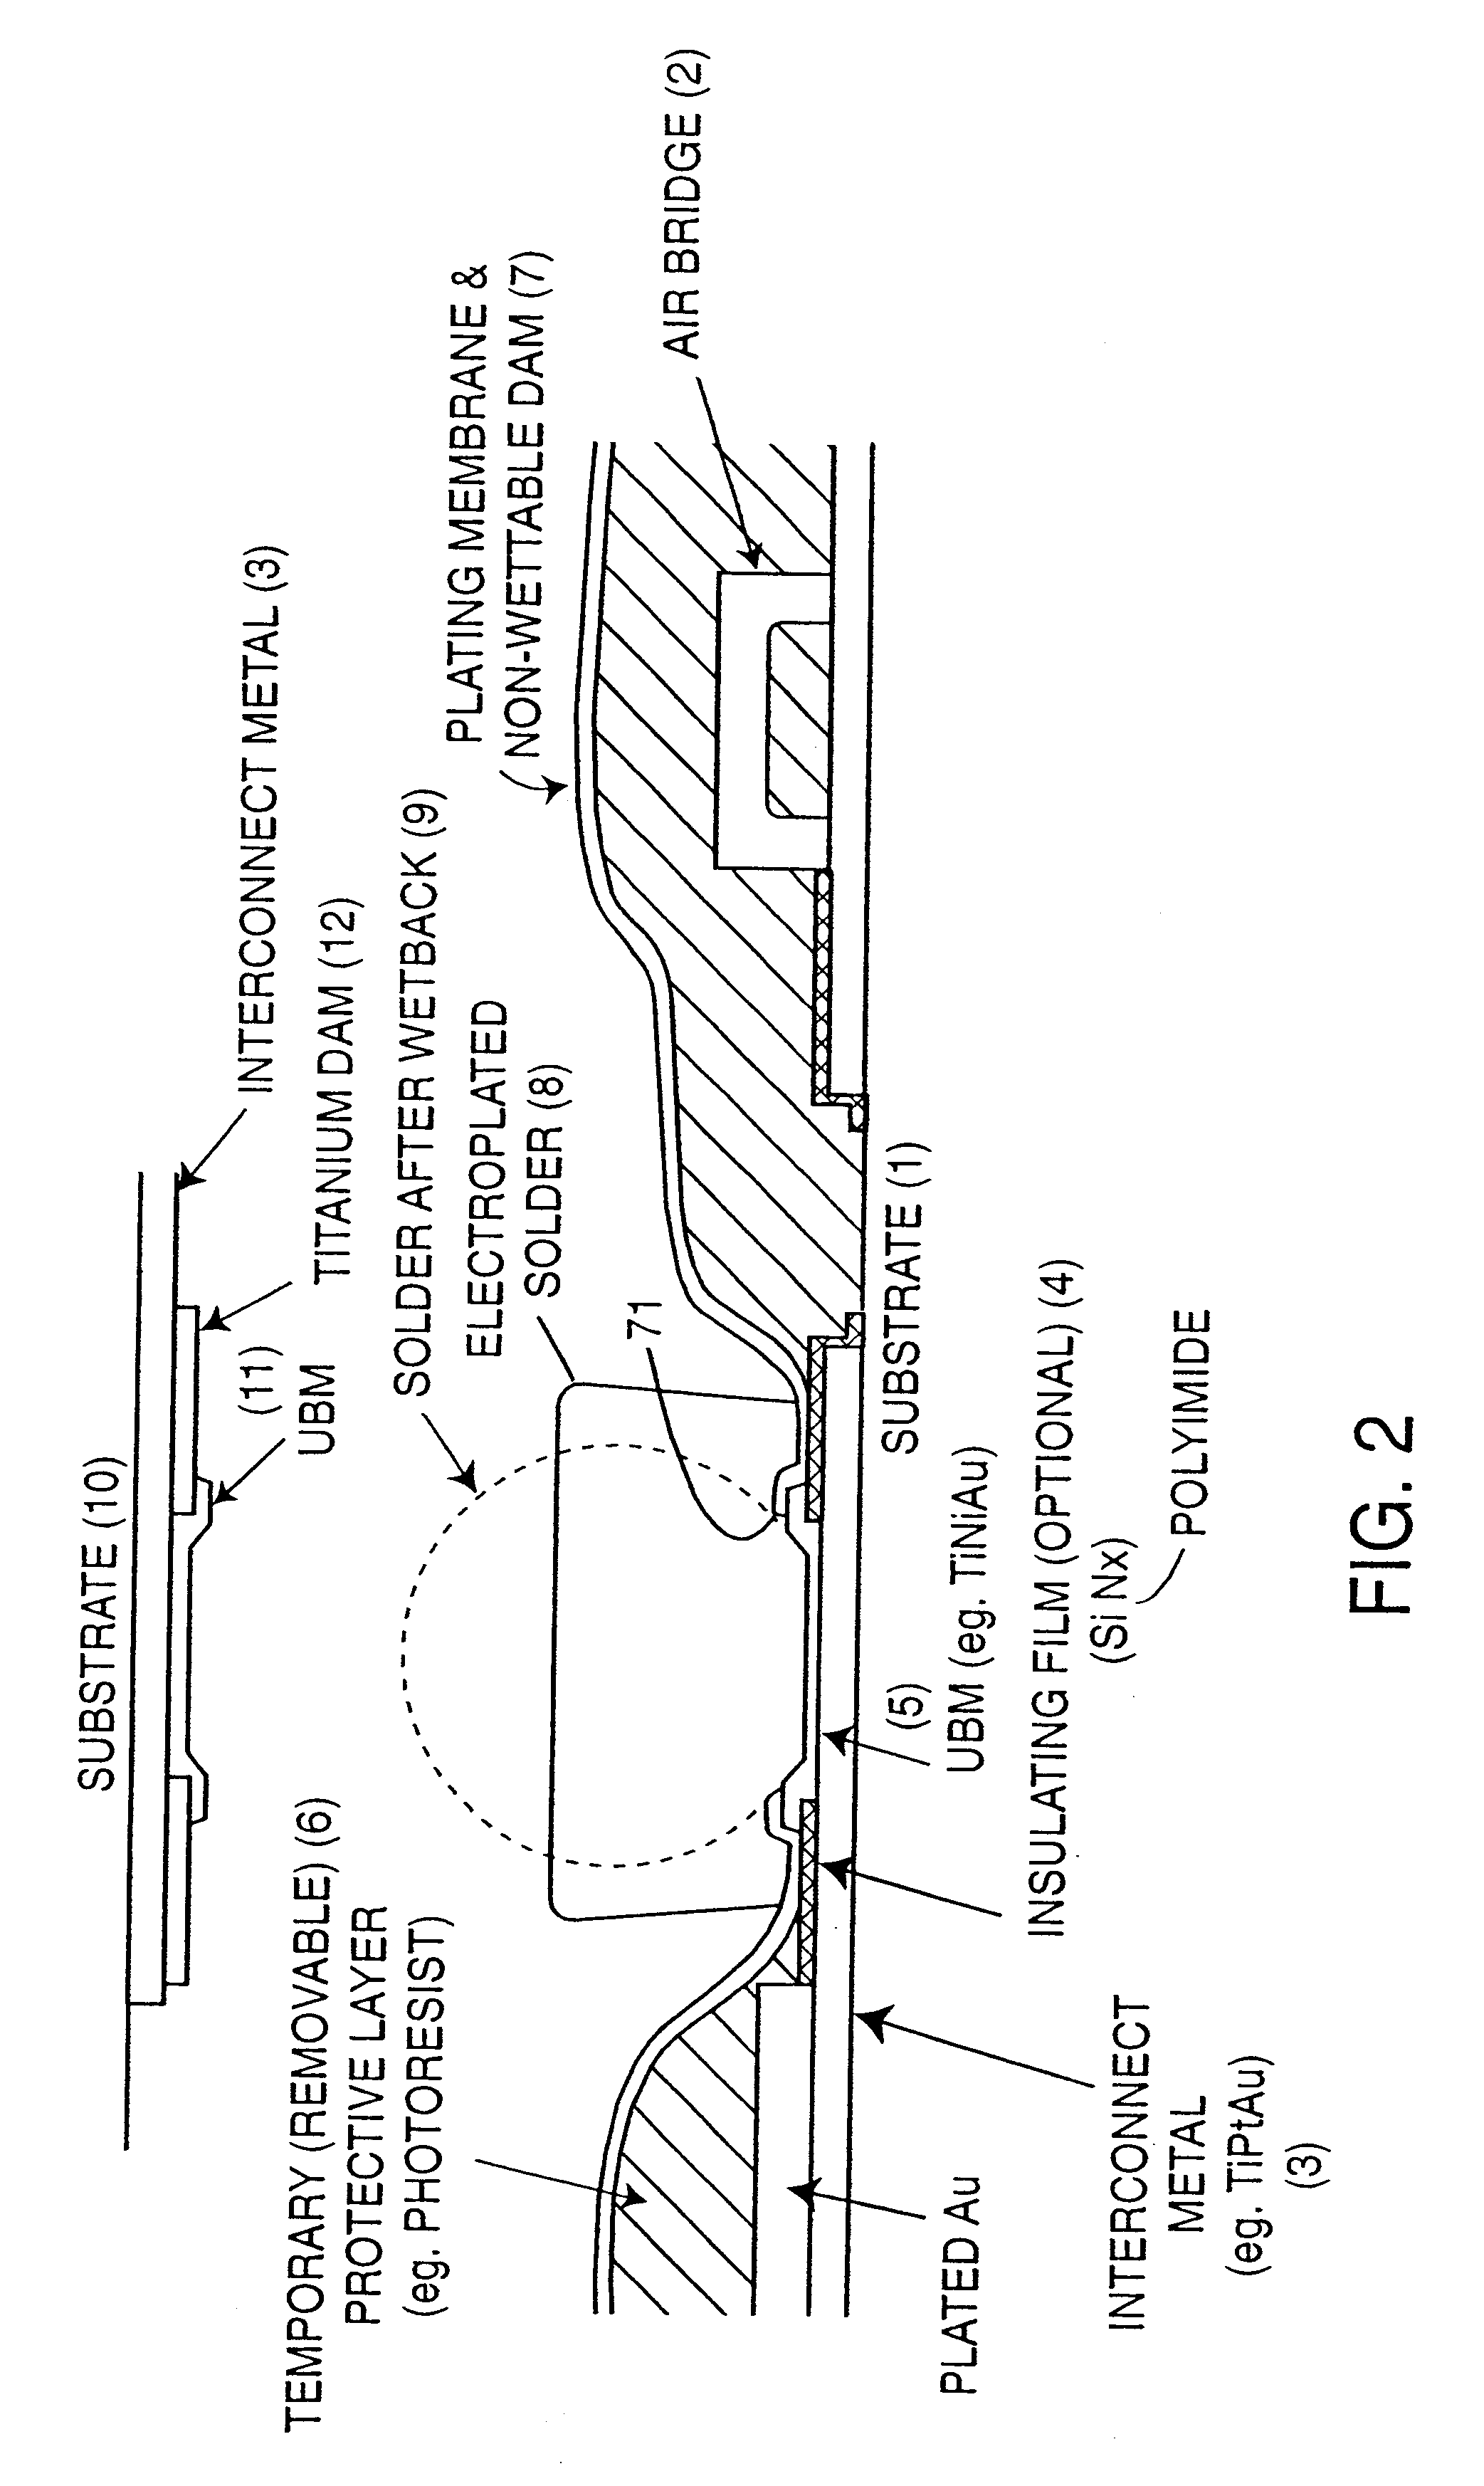 Method for manufacturing precision electroplated solder bumps